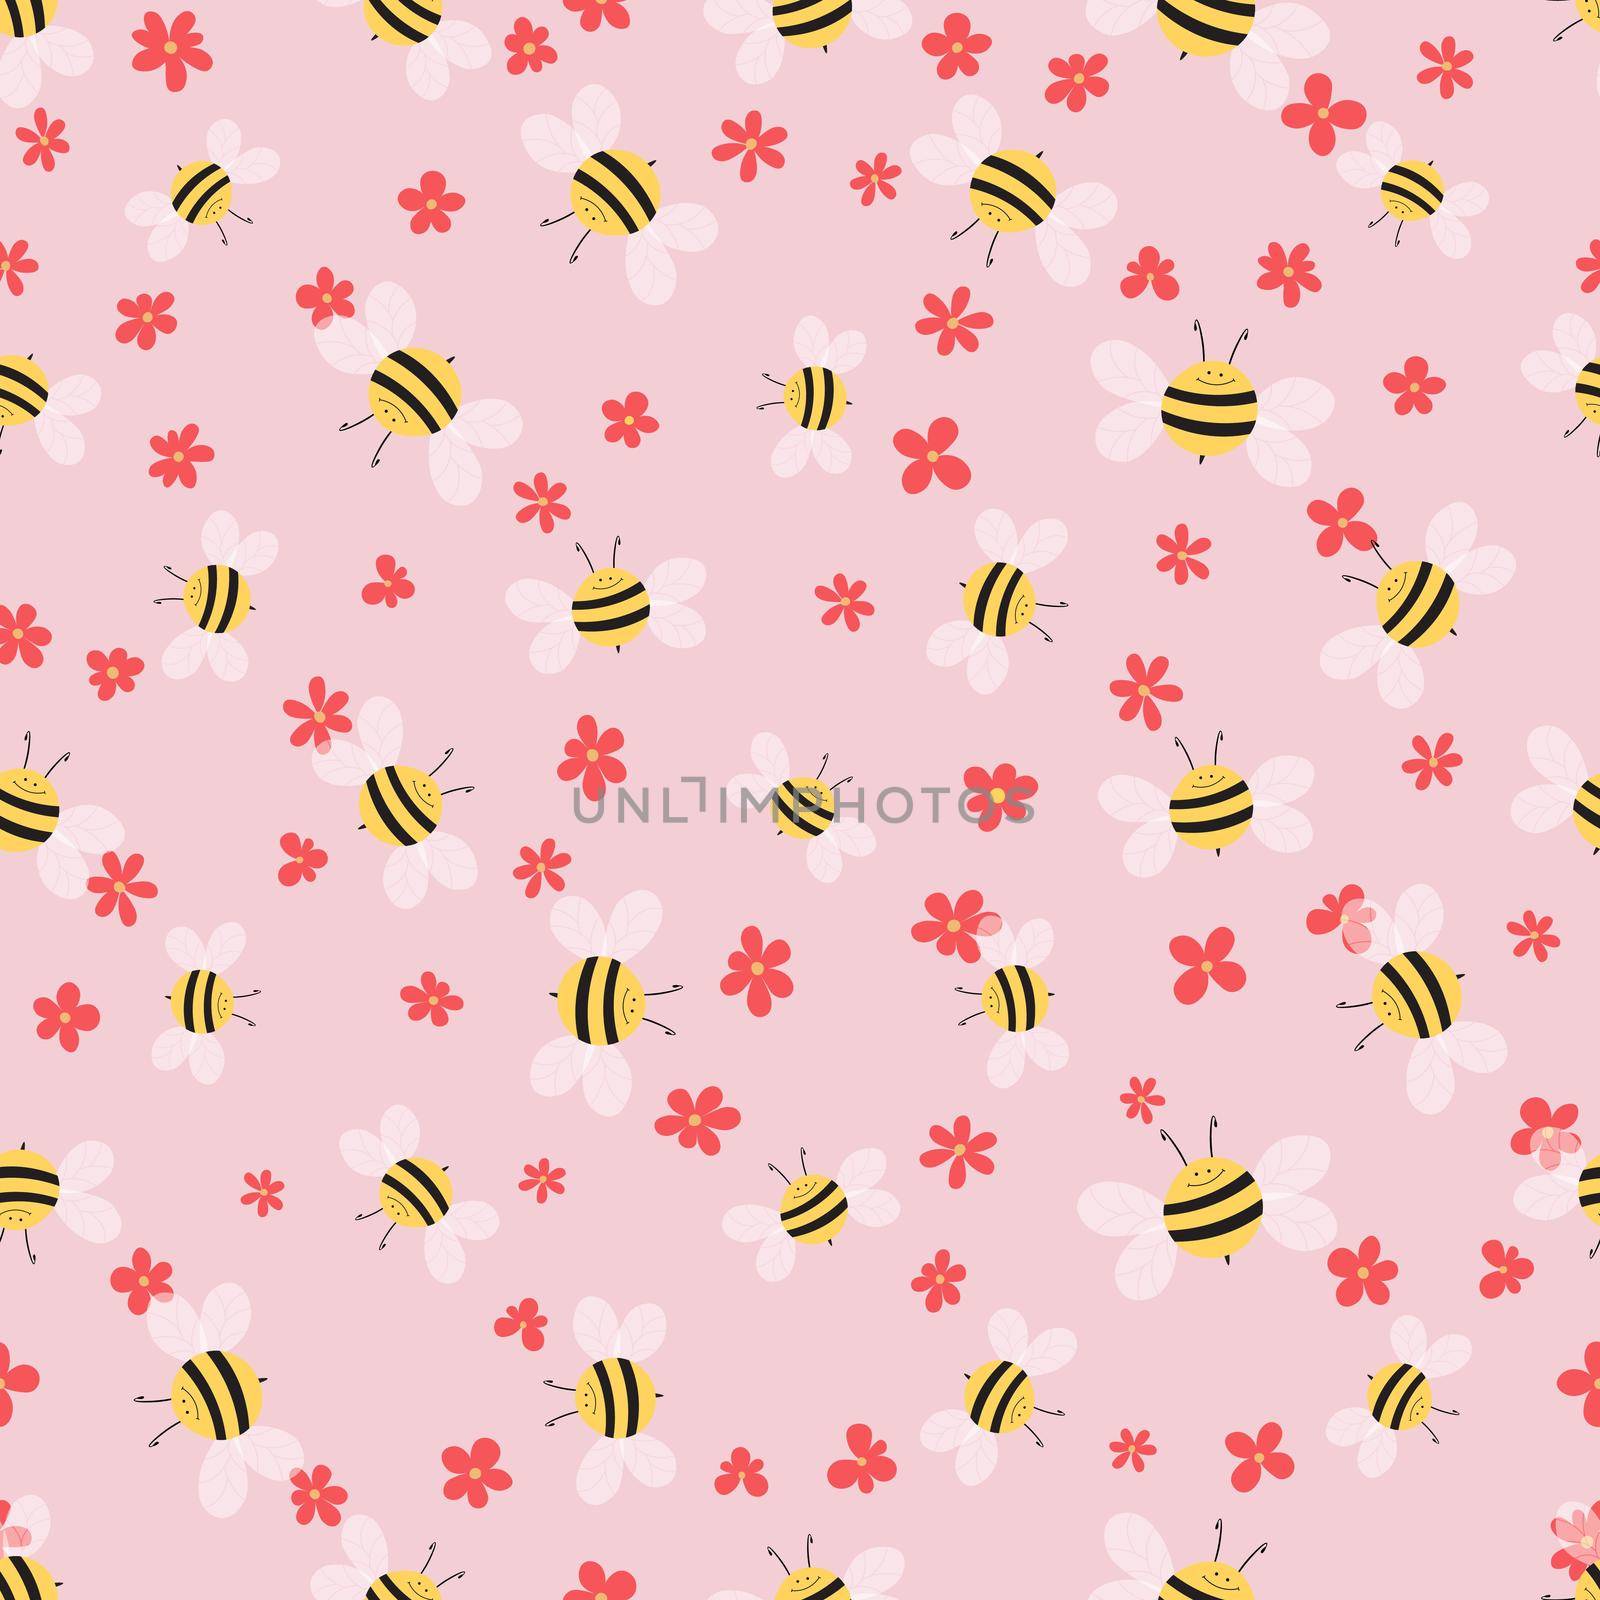 Seamless pattern with bees and flowers on color background. Adorable cartoon wasp characters. Template design for invitation, cards, textile, fabric. Doodle style. Vector stock illustration